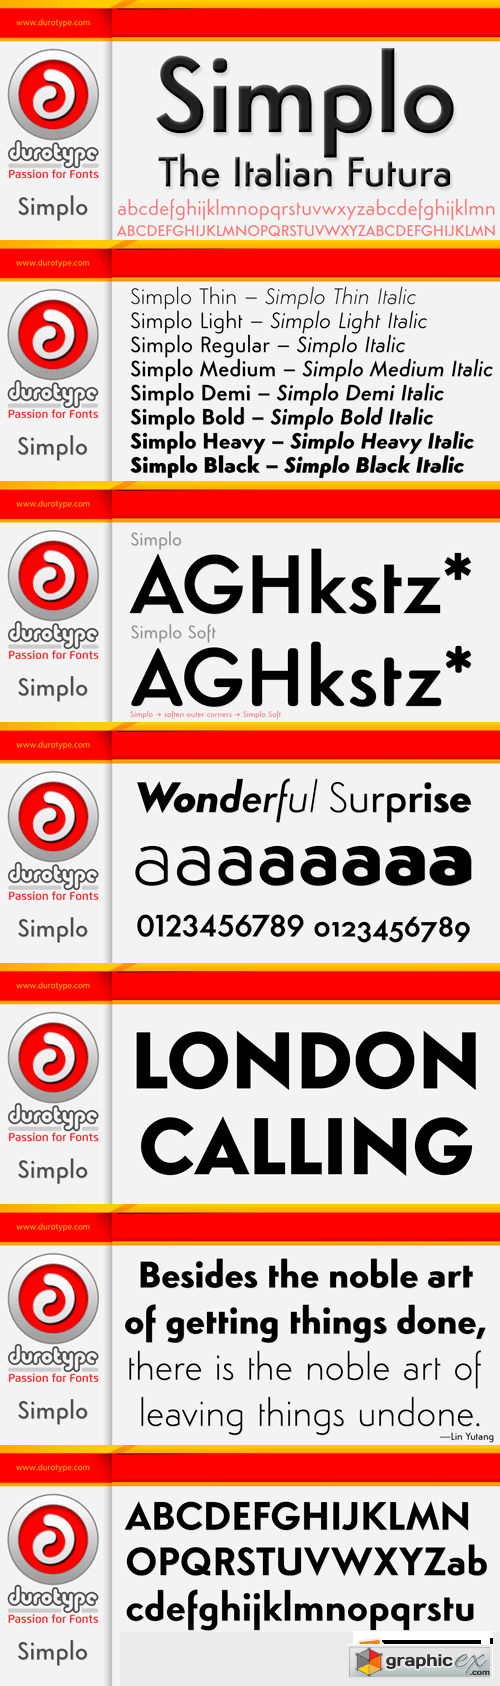 Simplo Font Family - 16 Fonts for $279